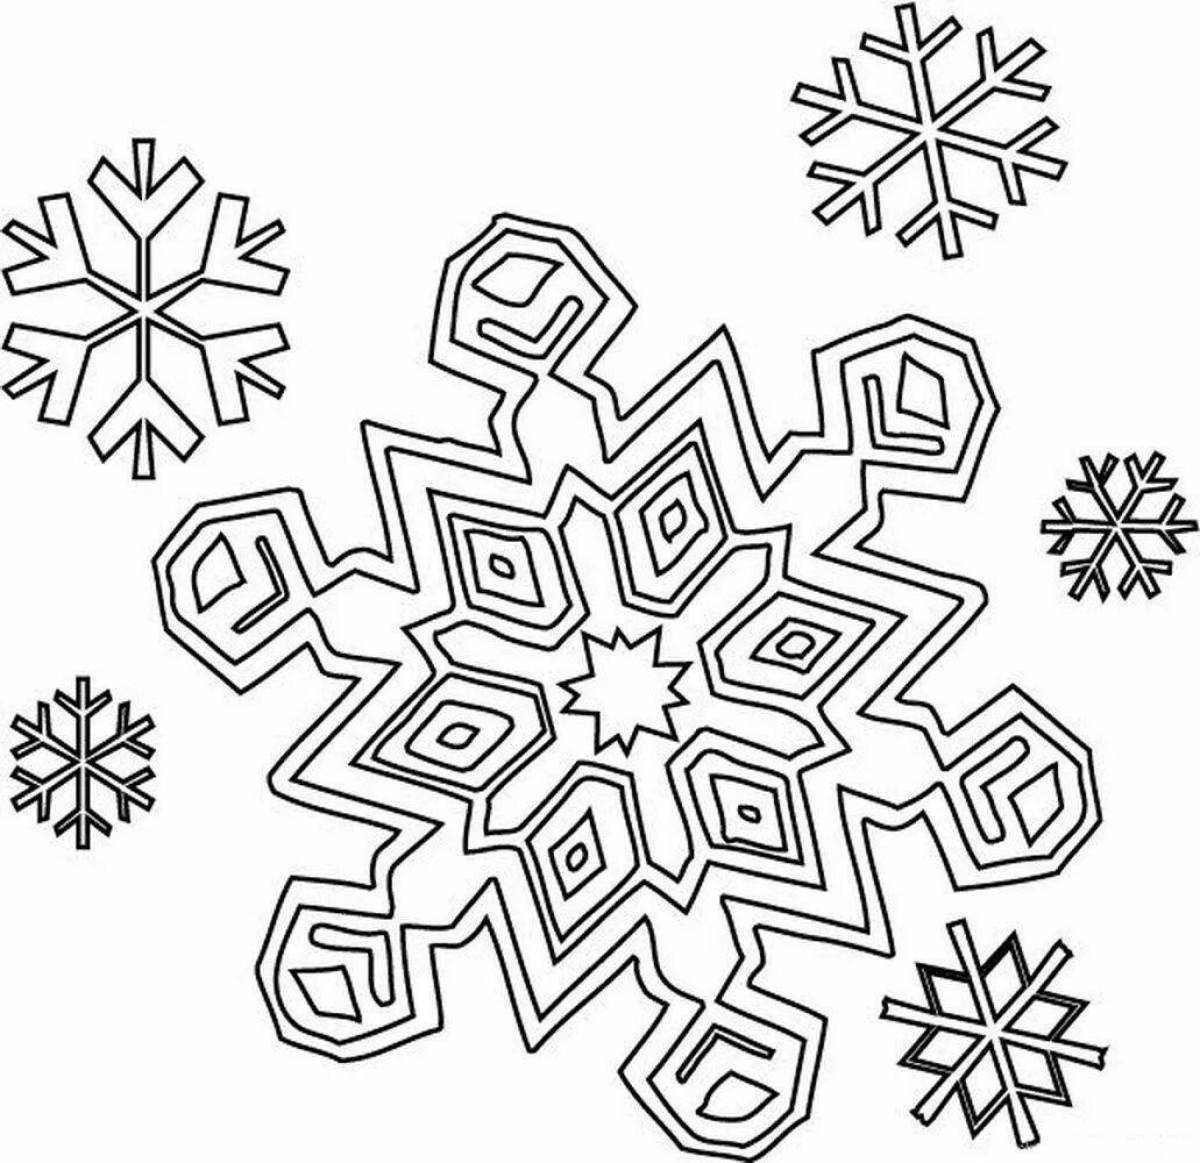 Coloring page dazzling snowflake for children 2-3 years old